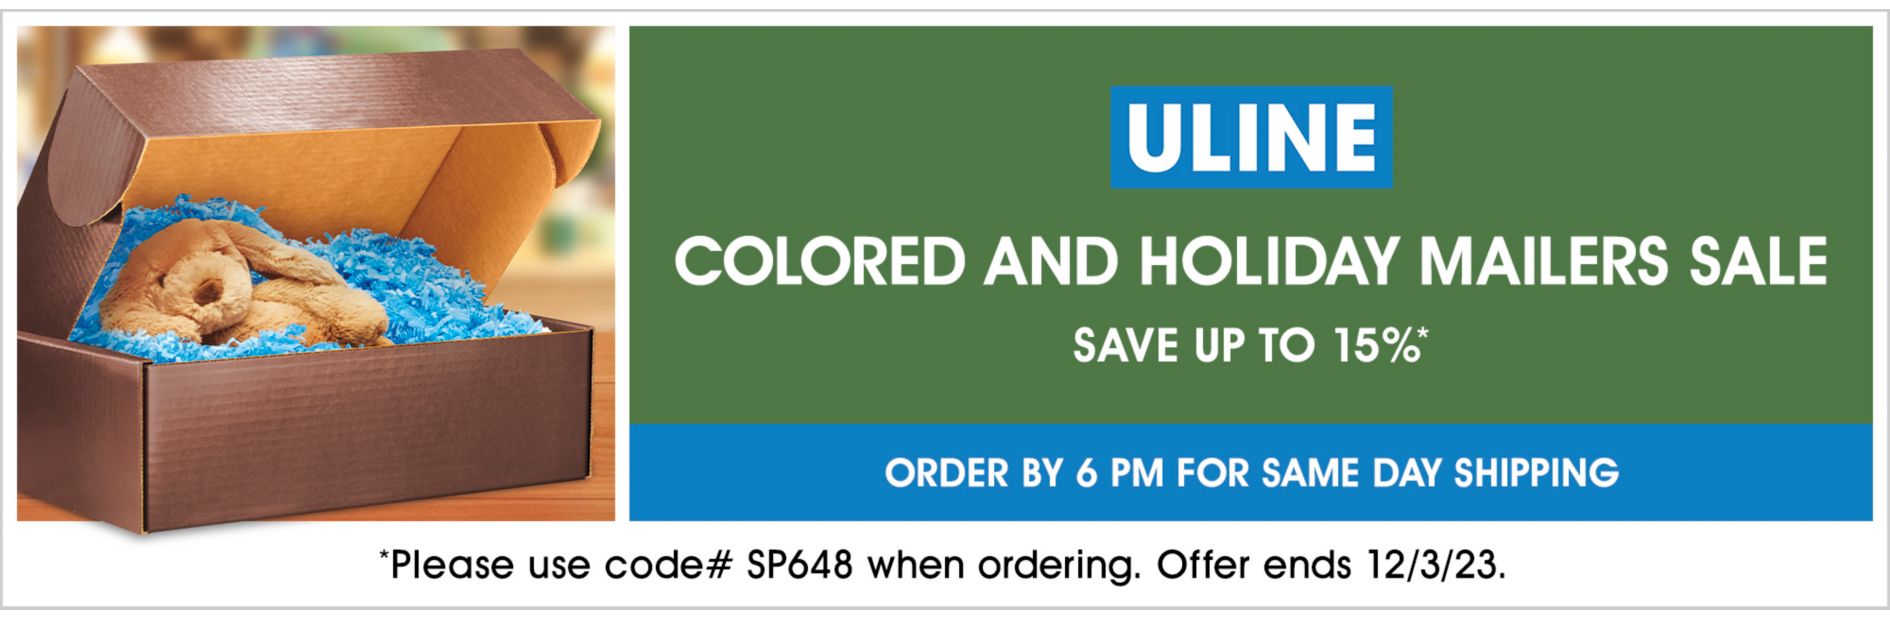 SP648 Colored and Holiday Mailers Sale, Save up to 15%, Use code SP648, Offer ends 12/3/23